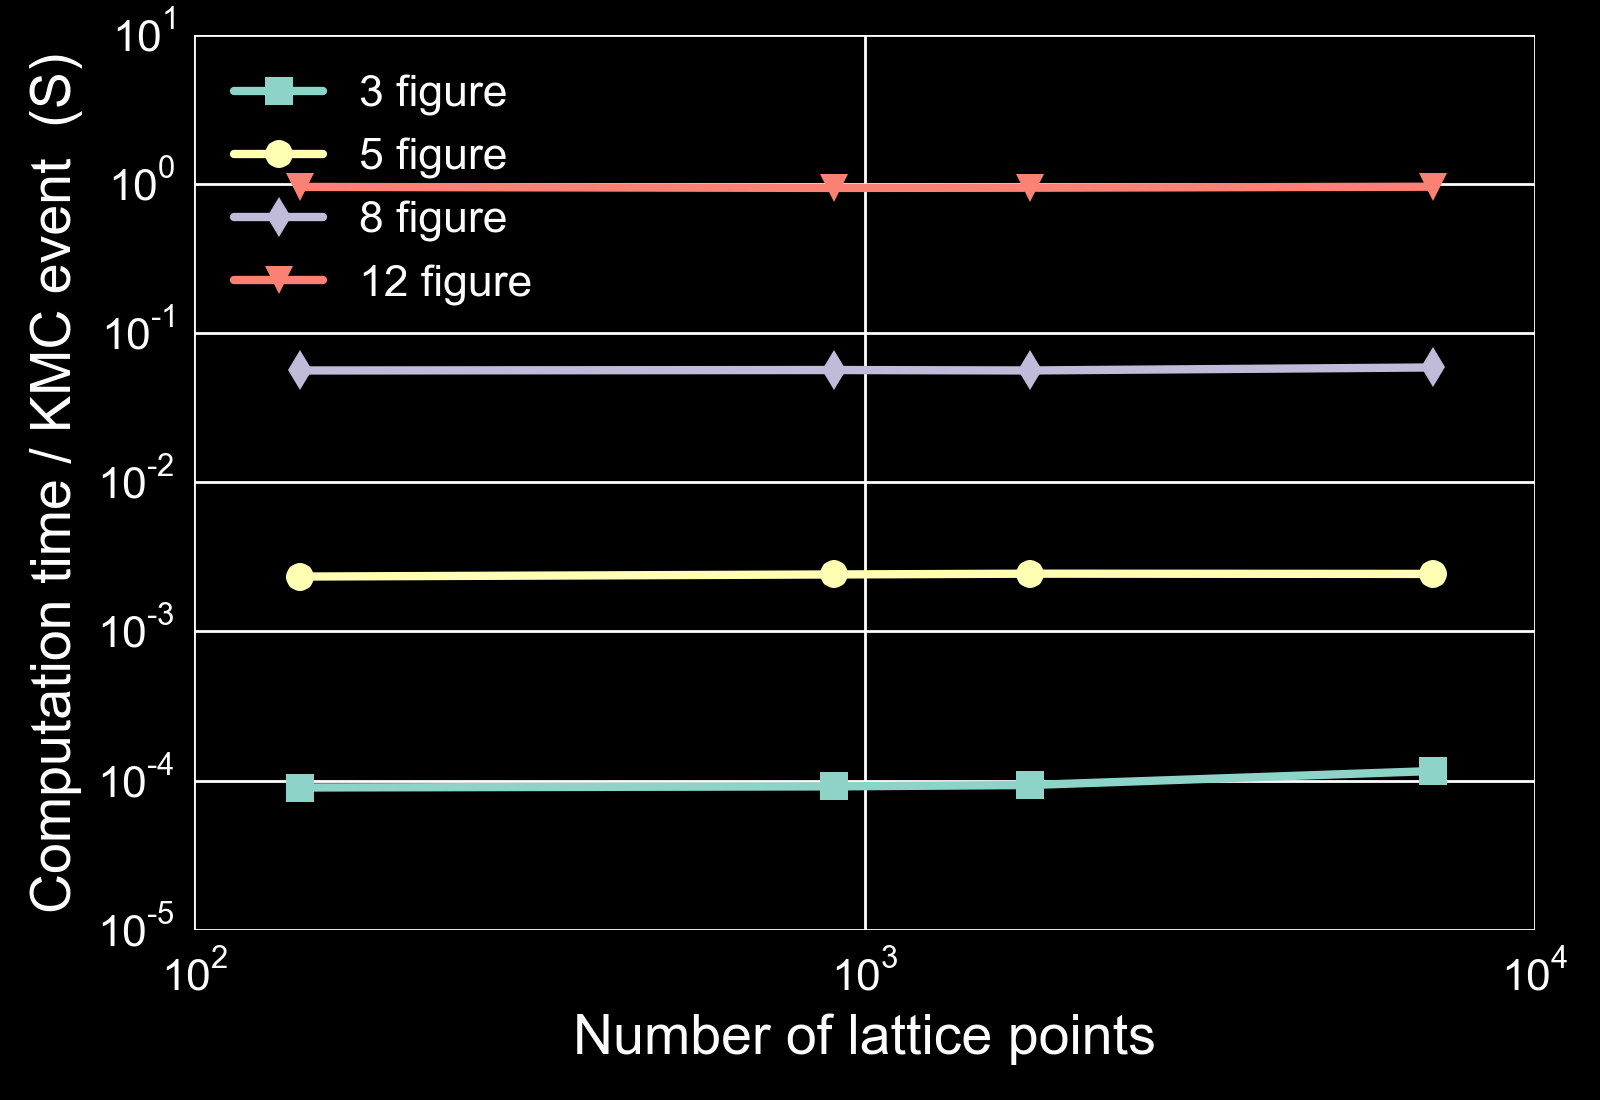 Time per KMC event is independent of lattice size.